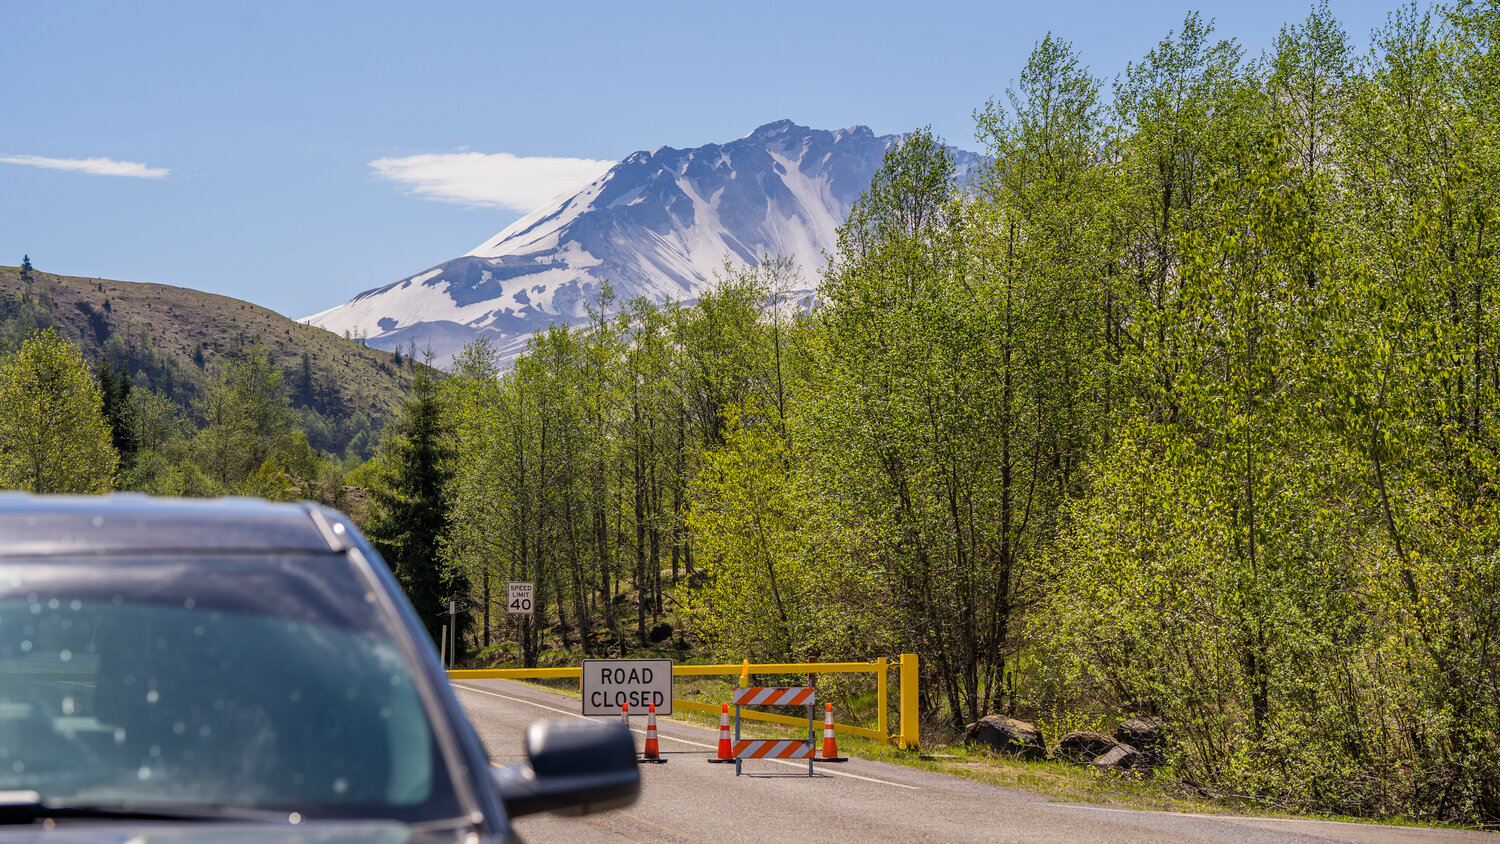 Washington State Department of Transportation and members of the Washington State Patrol respond to the scene of a landslide along Spirit Lake Highway on Monday, May 15.